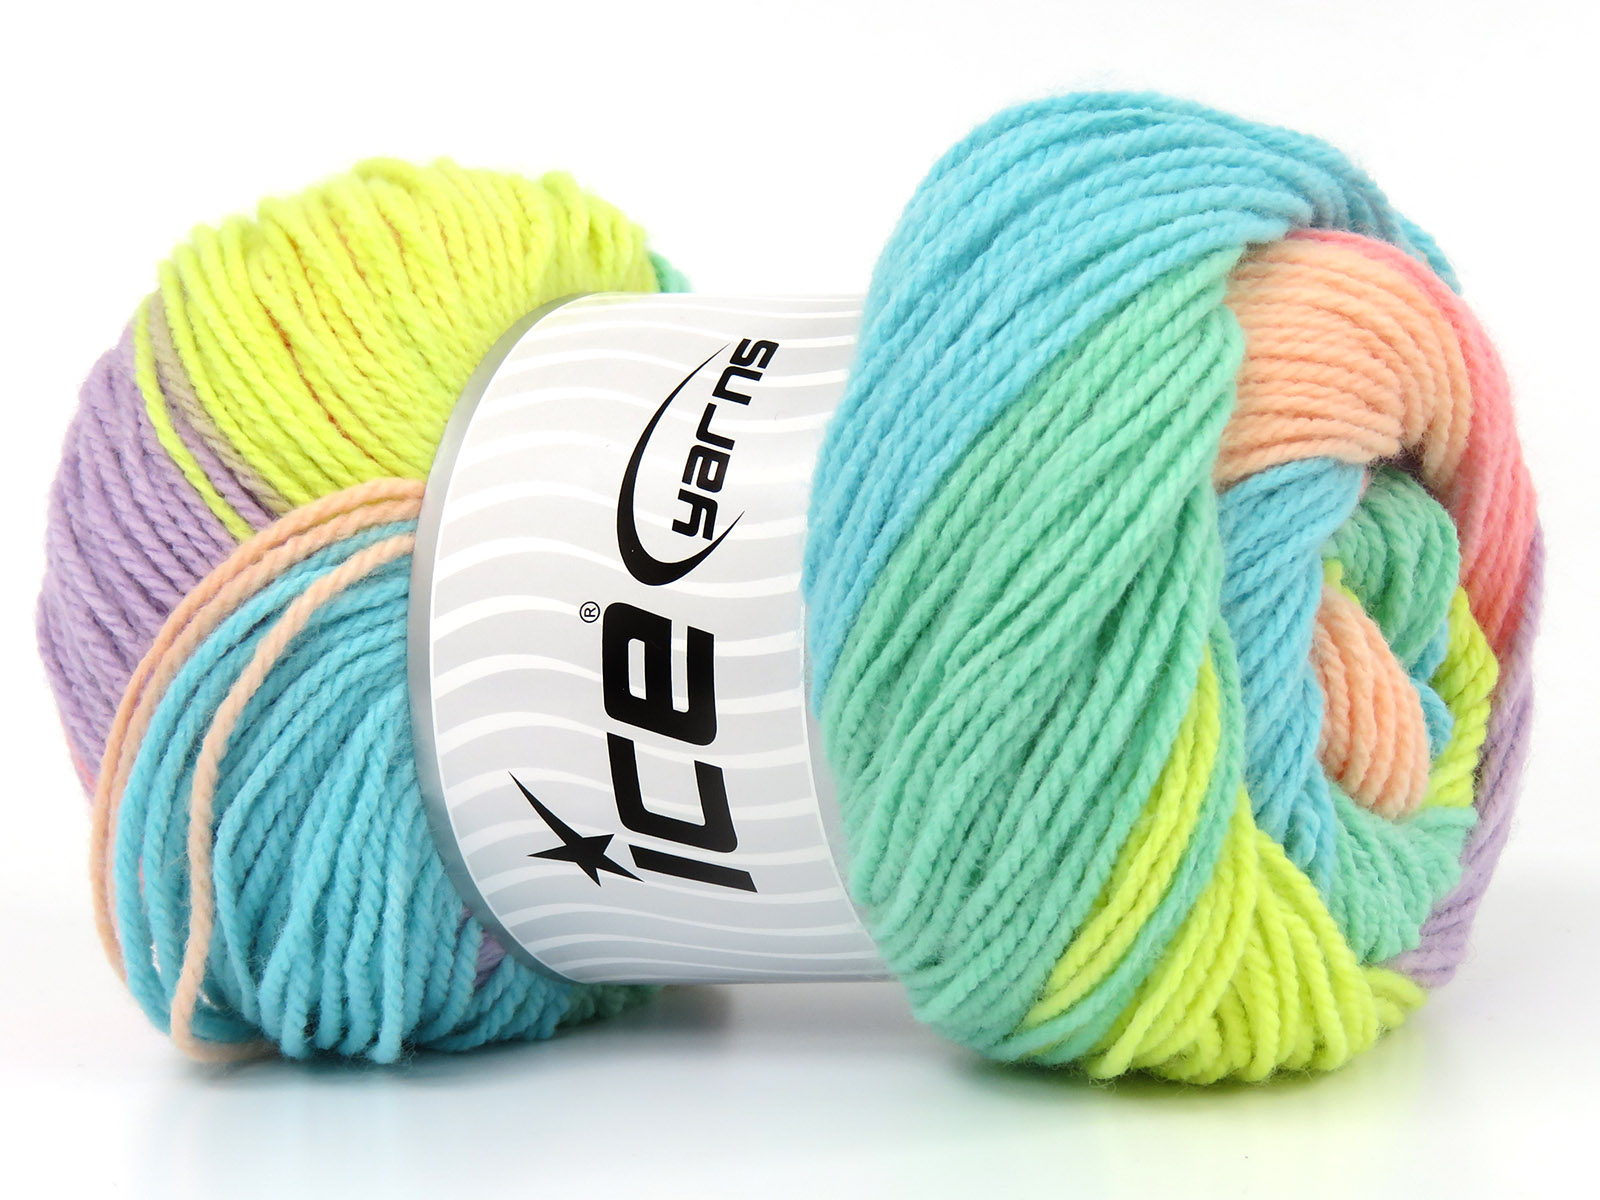 Cakes Cotton Fine Green Shades, Yellow, Gold, Black at Ice Yarns Online Yarn